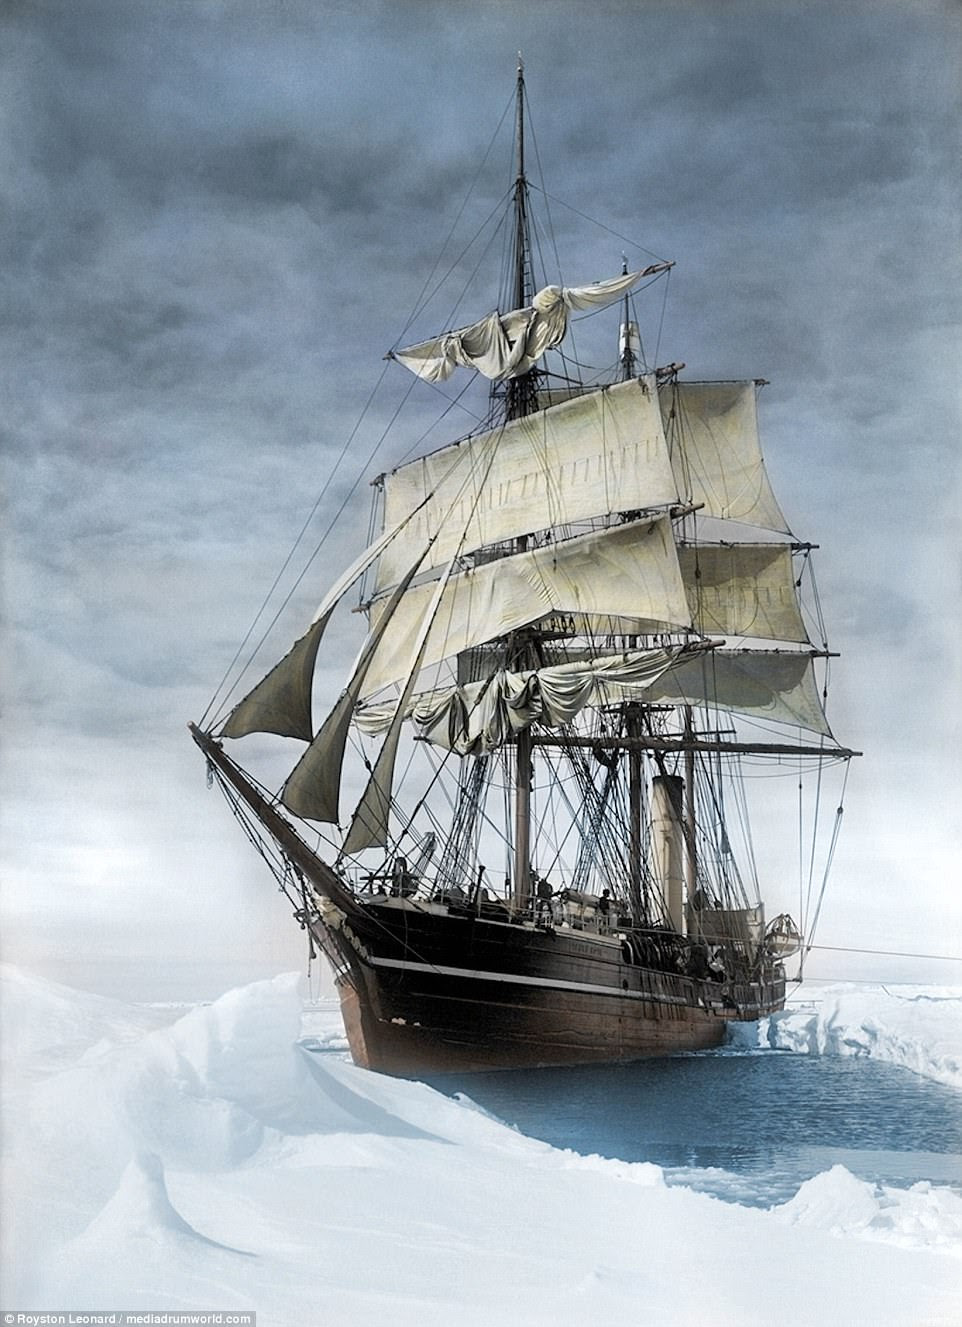 The Terra Nova was described by Scott, who bought it in 1909 for  £12,500, as 'a wonderfully fine ice ship'. And he wrote: 'As she bumped the floes with mighty shocks, crushing and grinding a way through some, twisting and turning to avoid others, she seemed like a living thing fighting a great fight'